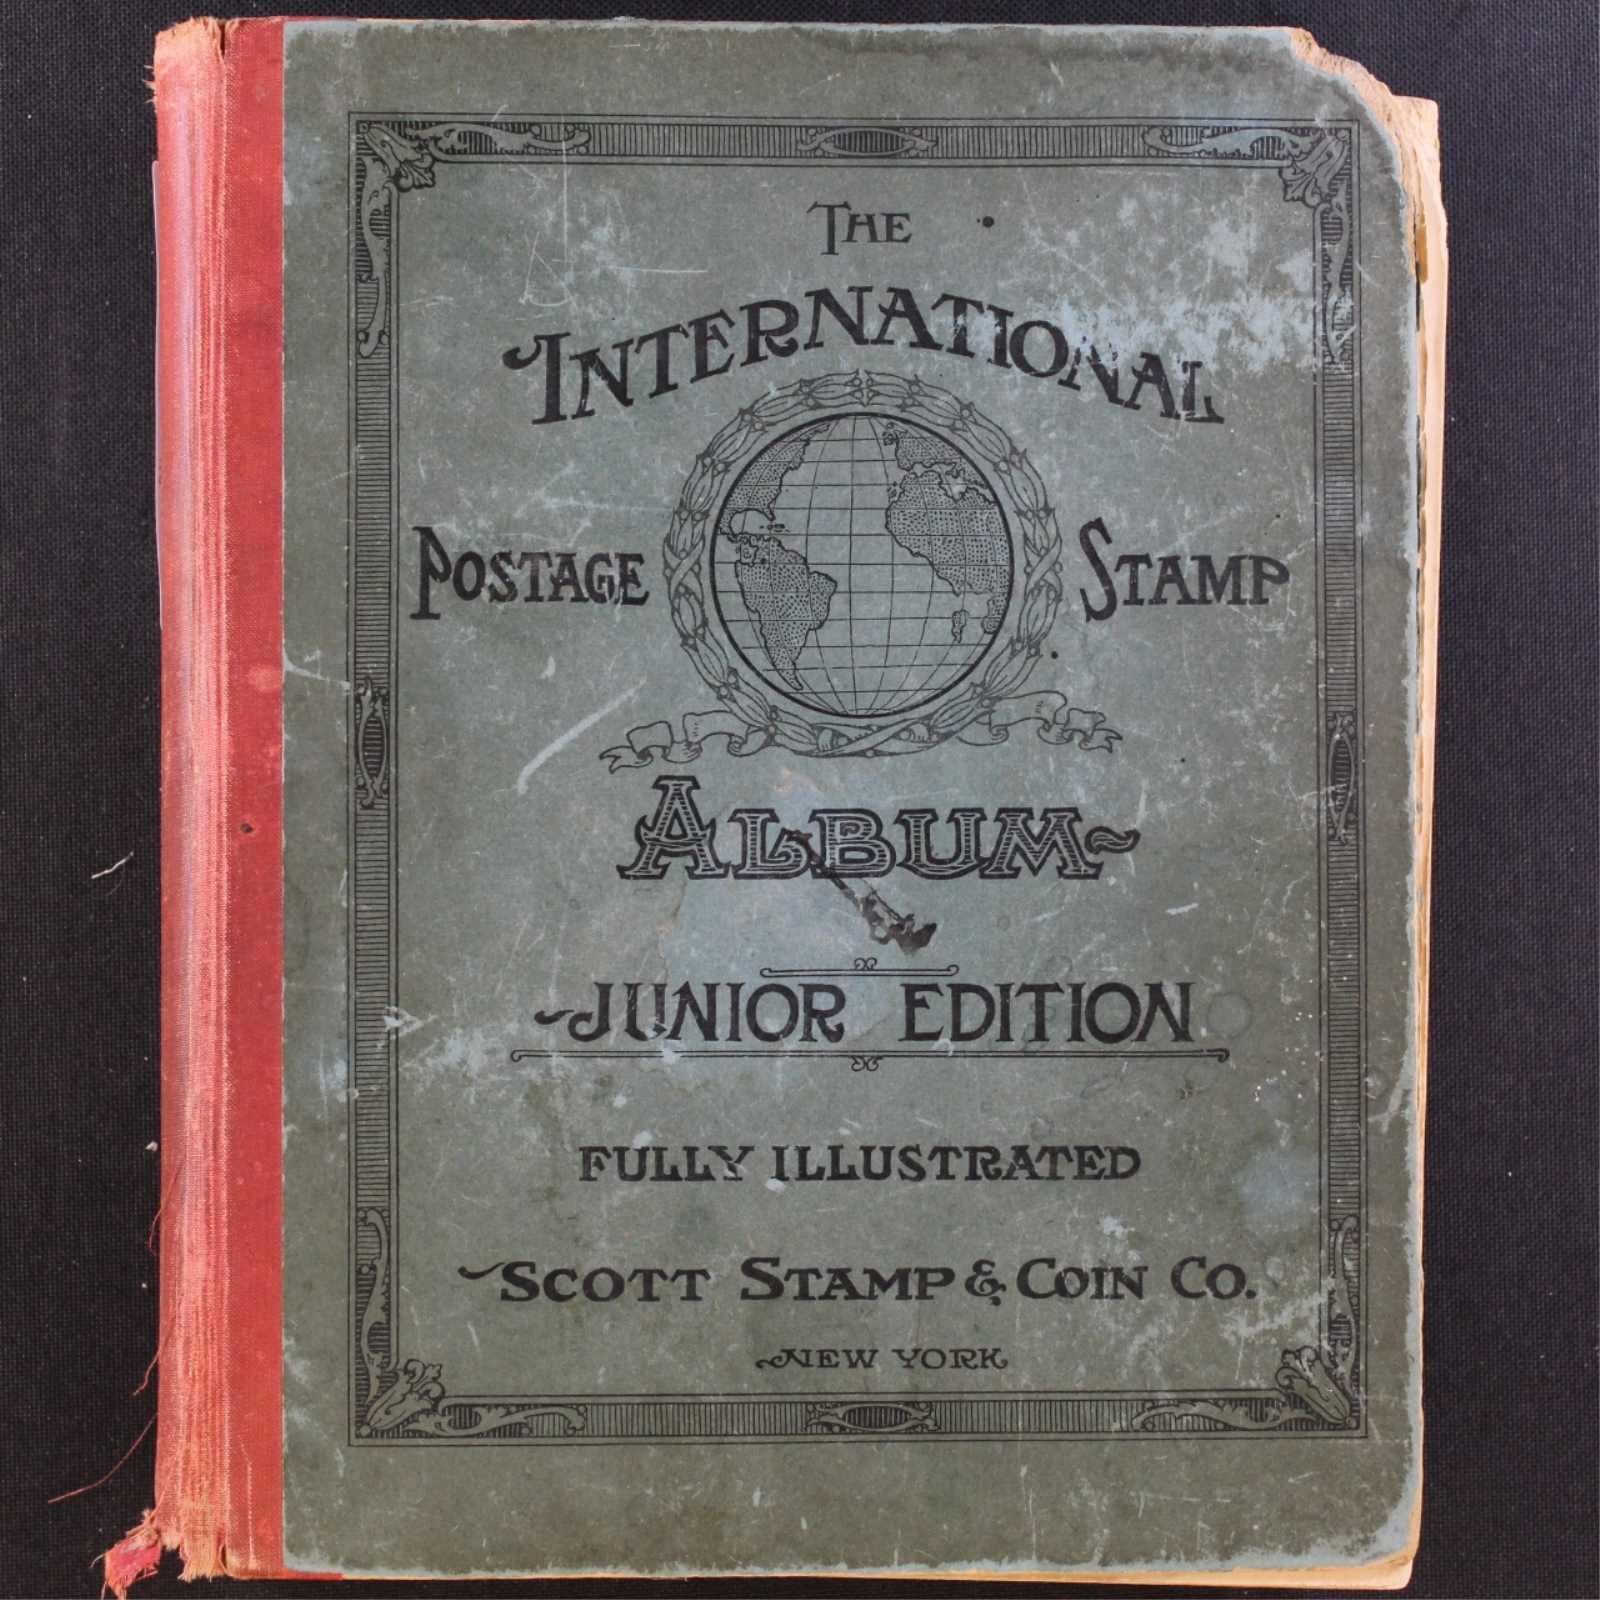 August 1st, 2021 Weekly Stamps & Collectibles Auction